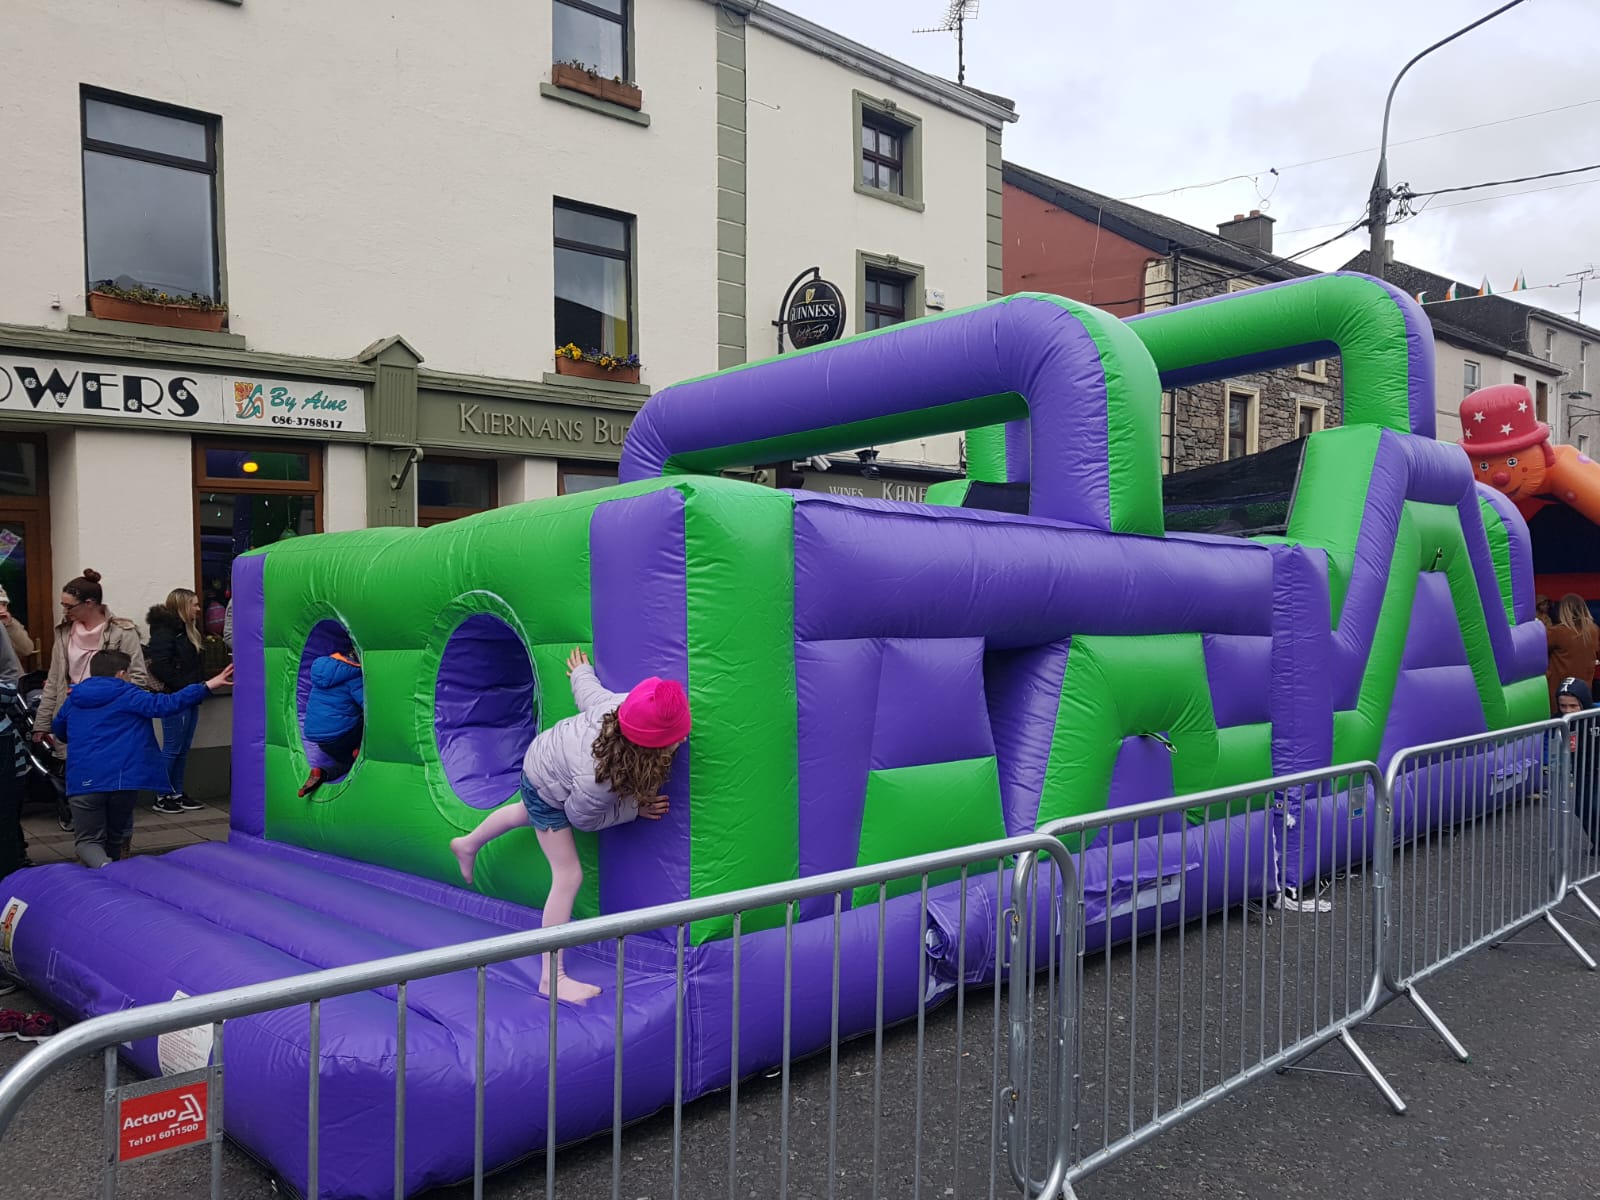 Purple and Green obstacle course,,bouncy castle Kerry, kerry bouncy castle hire, Killarney bouncy castles, Dingle bouncy castles,Tralee bouncy castles castlemaine bouncy castles,